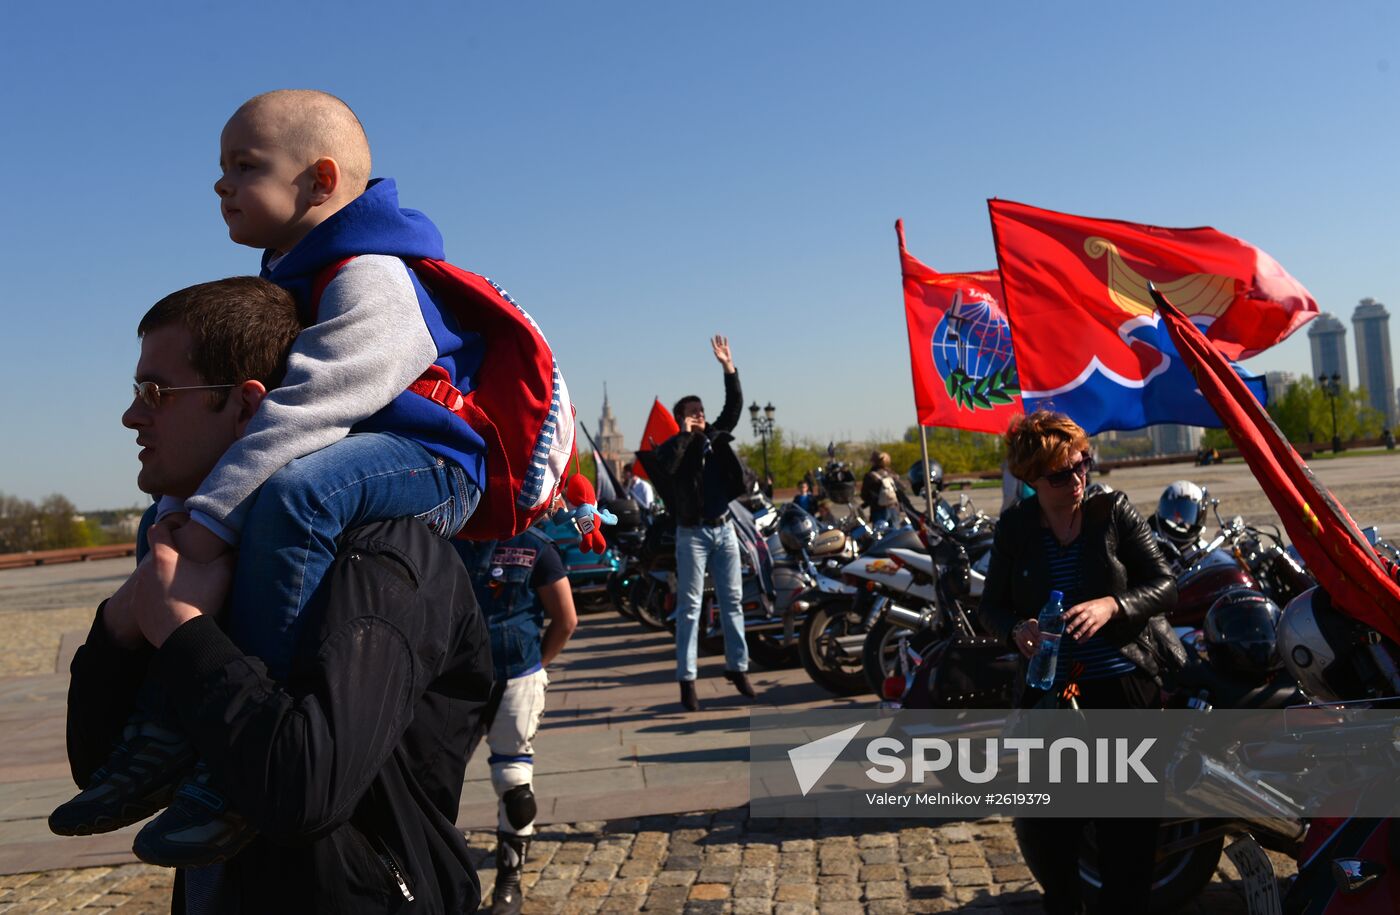 Participants in Our Great Victory motor rally welcomed in Moscow